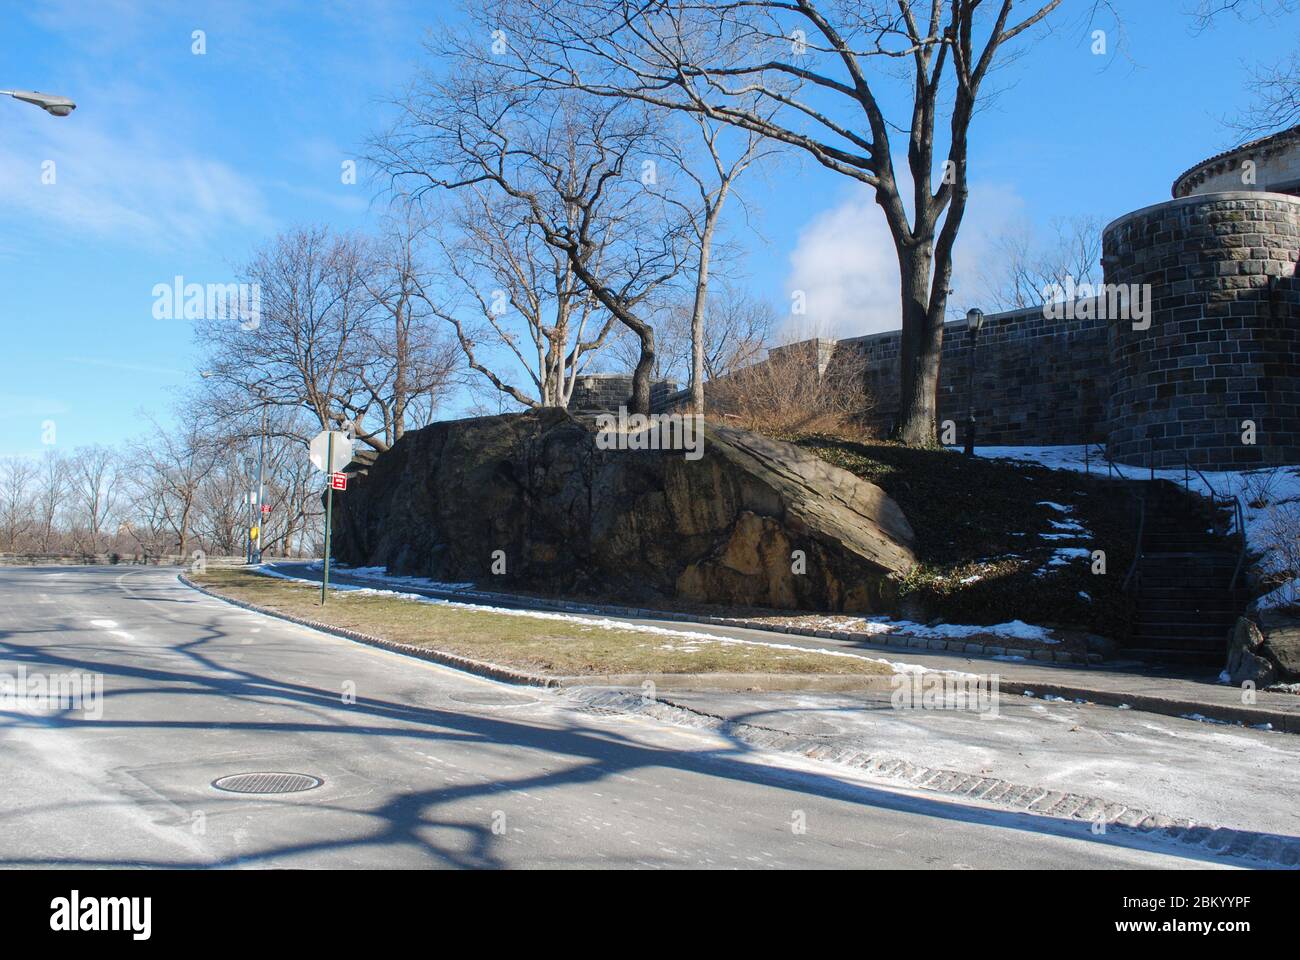 Public Space Recreation Fortification Architecture Fort Tryon Park, Riverside, Broadway, New York, NY 10040 United States designed by Olmsted Brothers Stock Photo